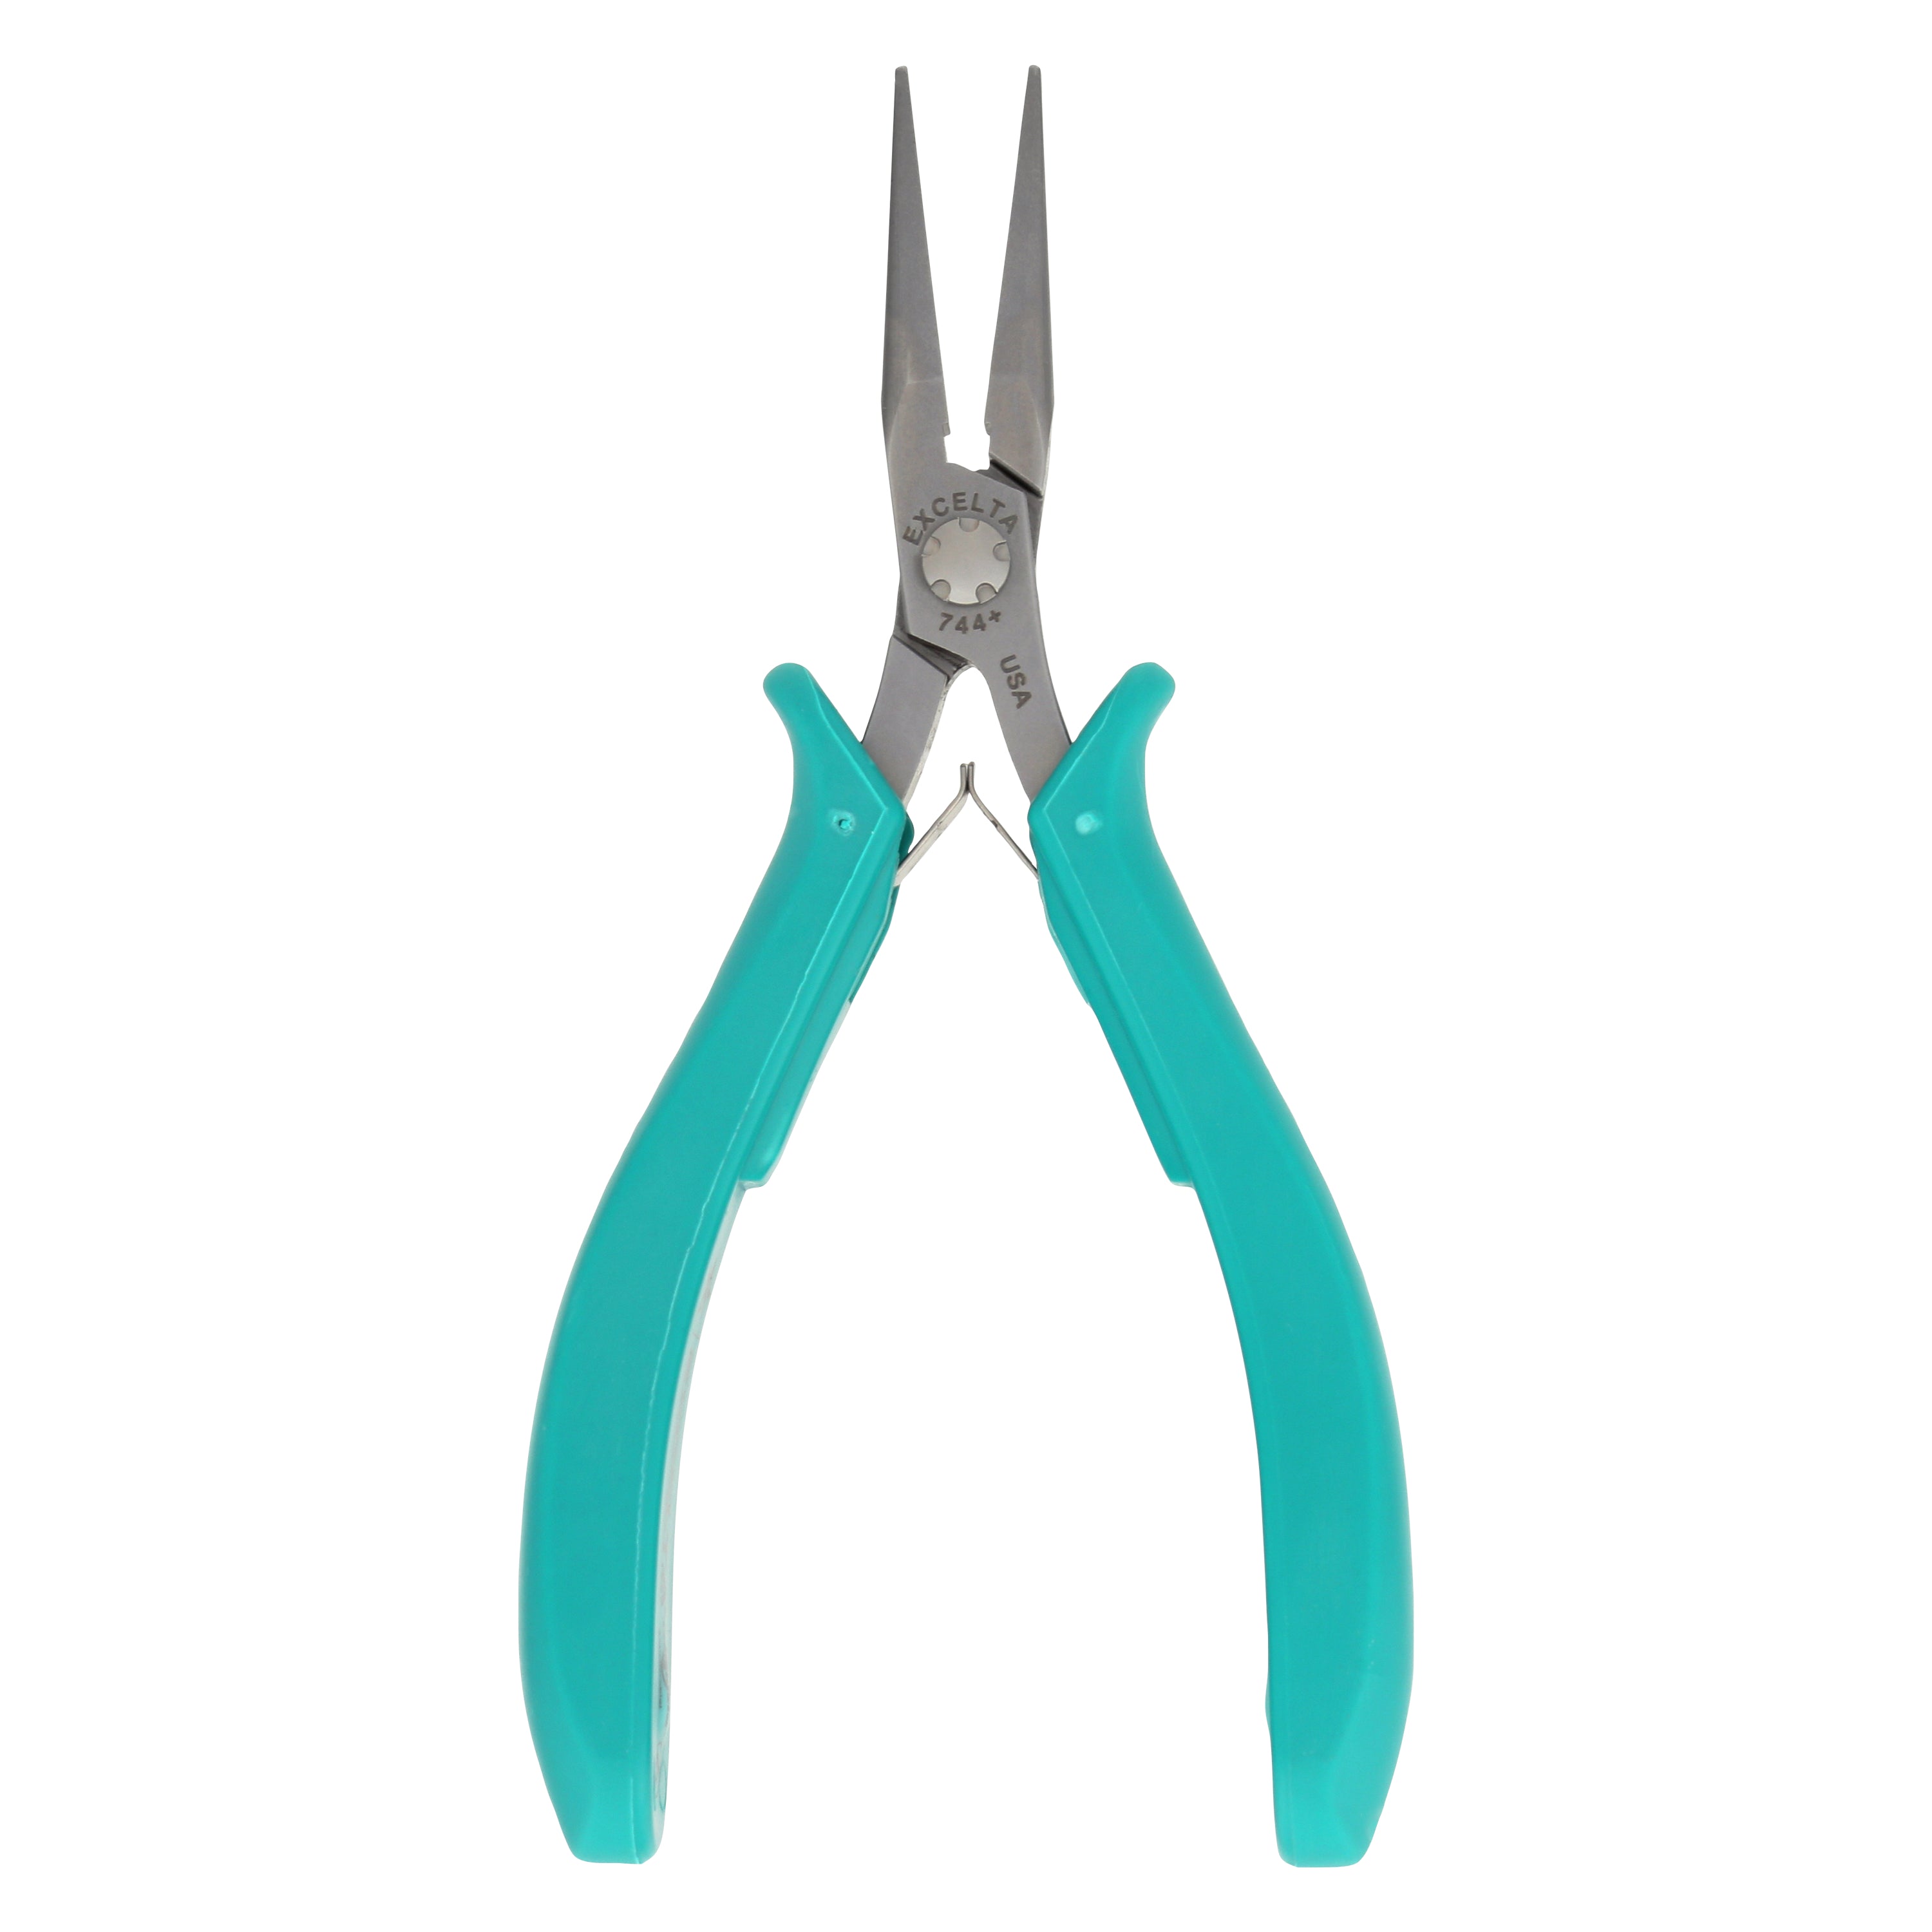 Chain Nose Pliers 